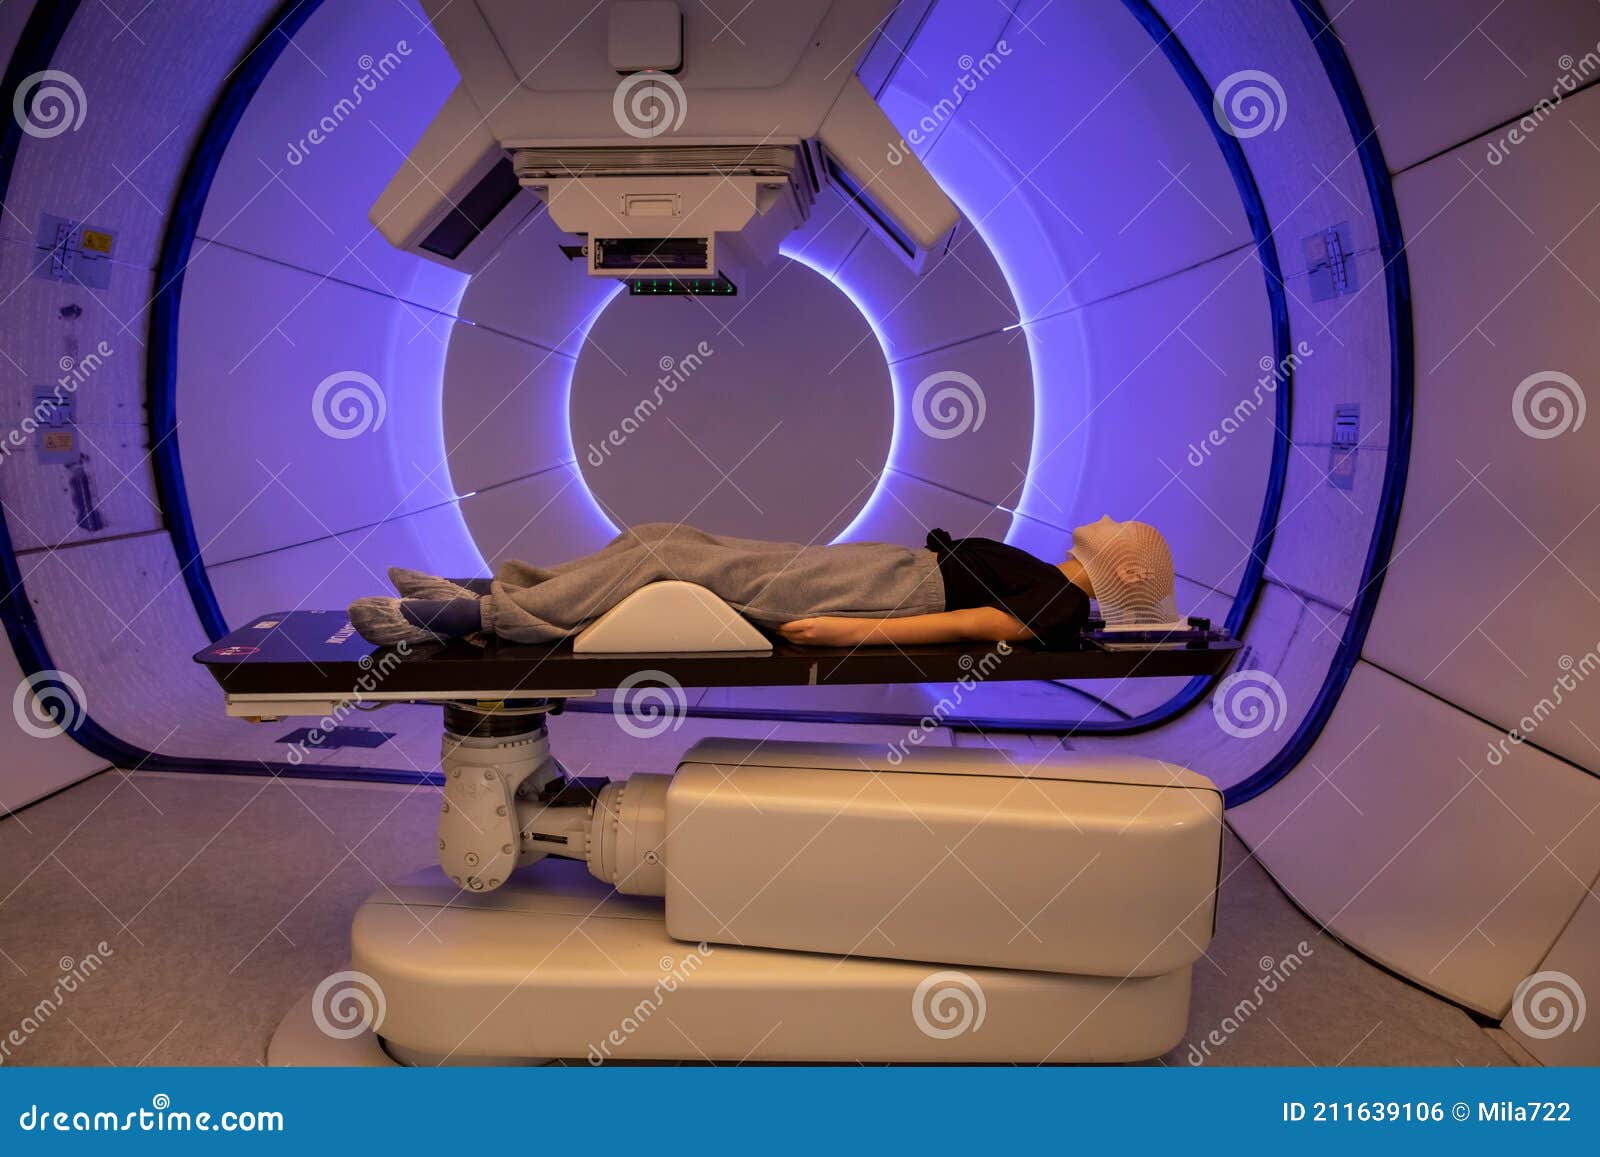 radiation proton therapy. brain cancer child patient lying on positioning bed with fixing mask on her head